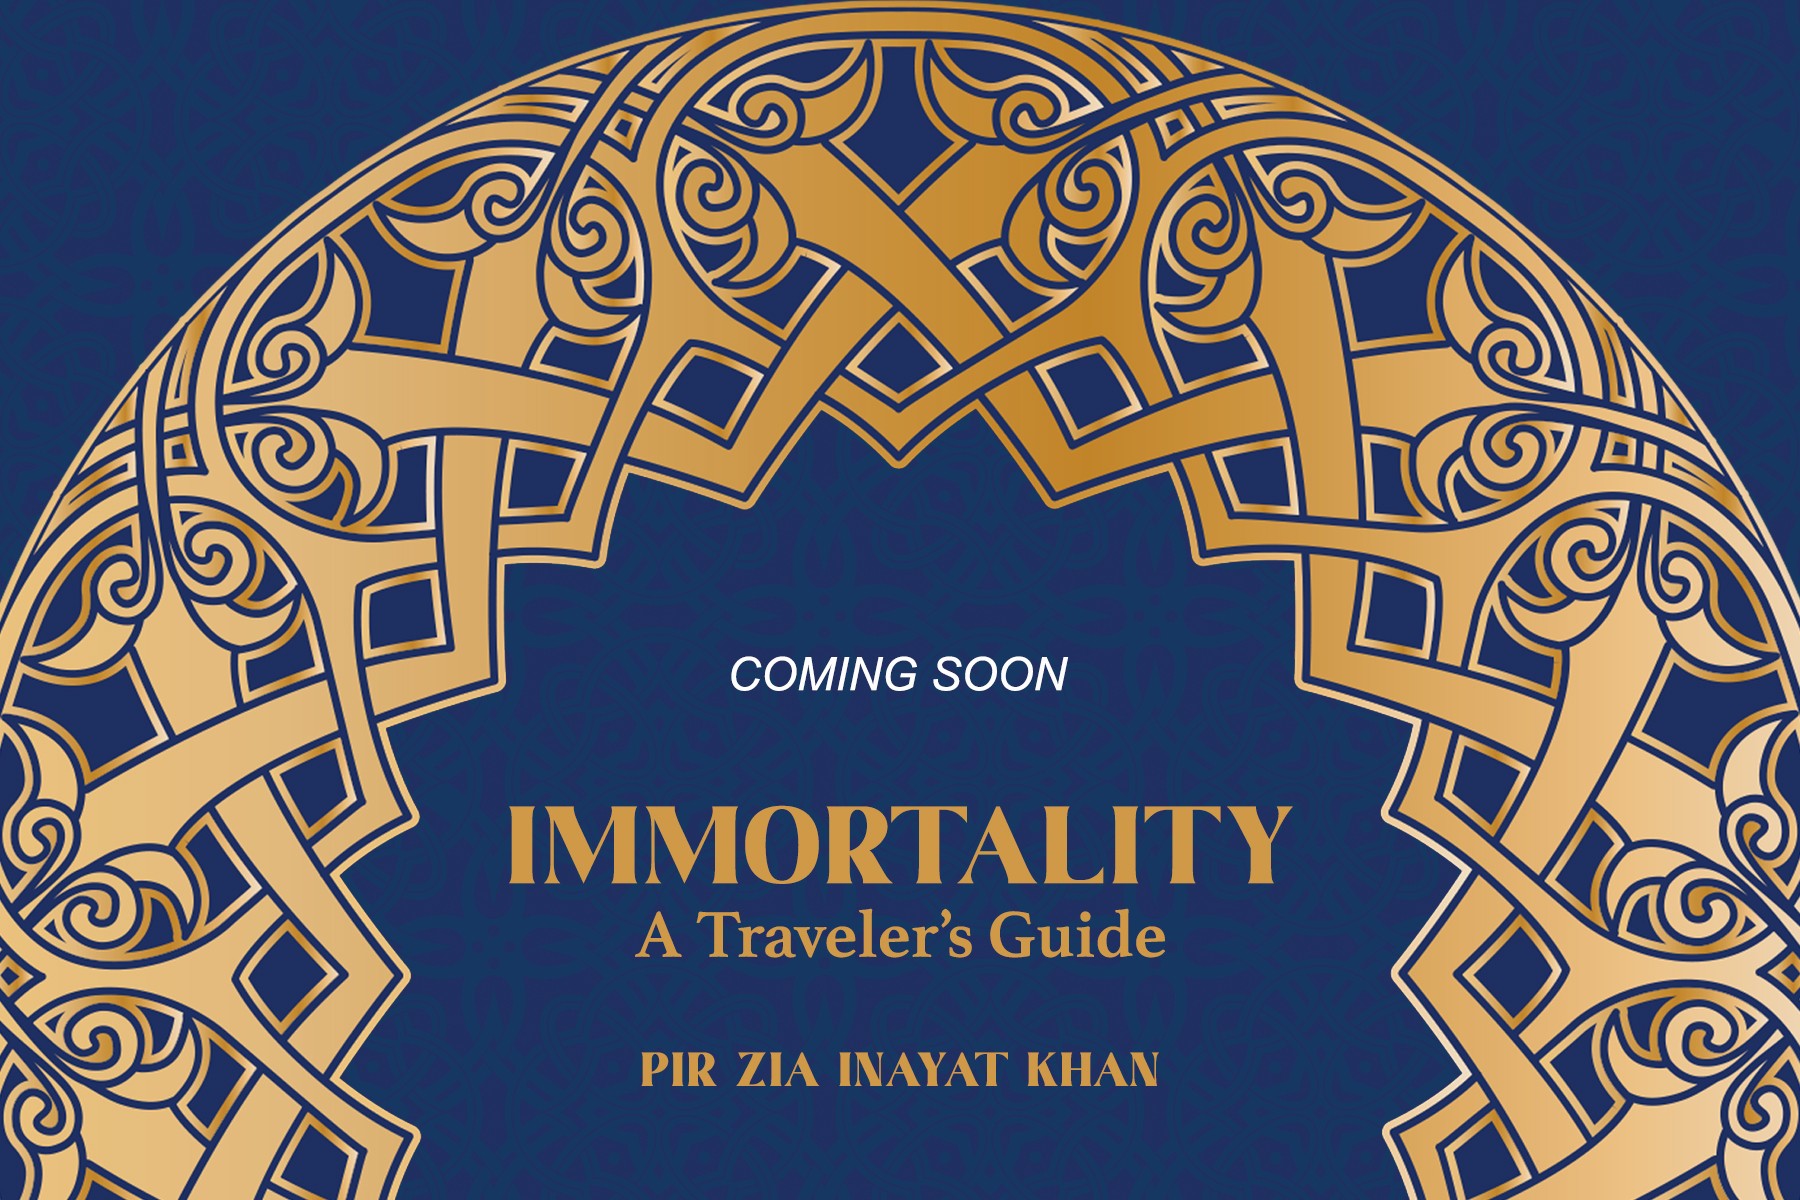 Immortality A Travelers Guide by Pir Zia Inayat Khan Coming Soon